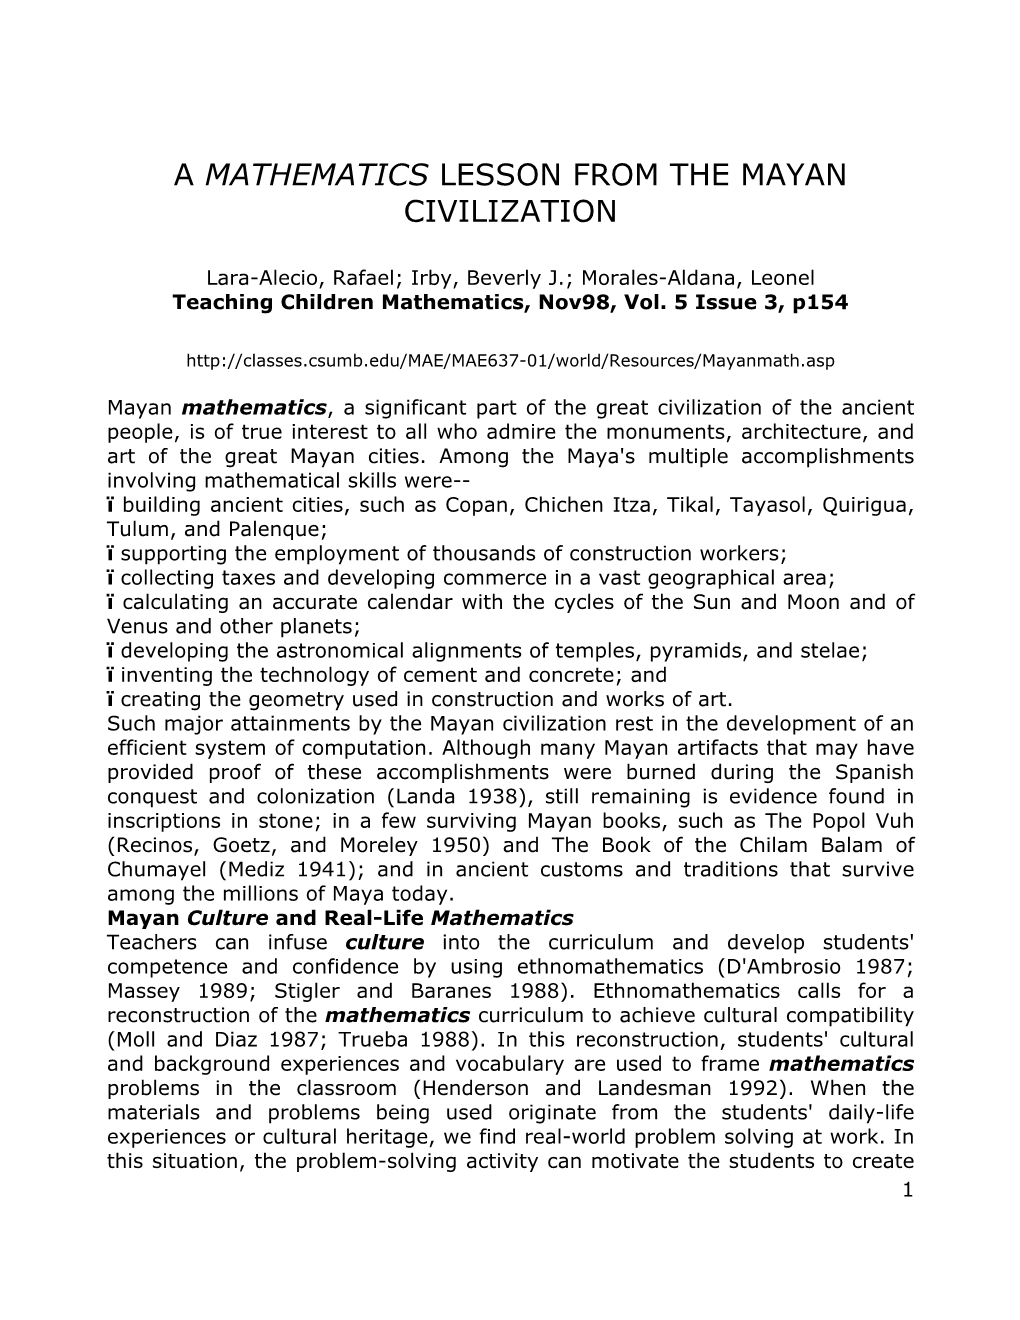 Title: a Mathematics Lesson from the Mayan Civilization